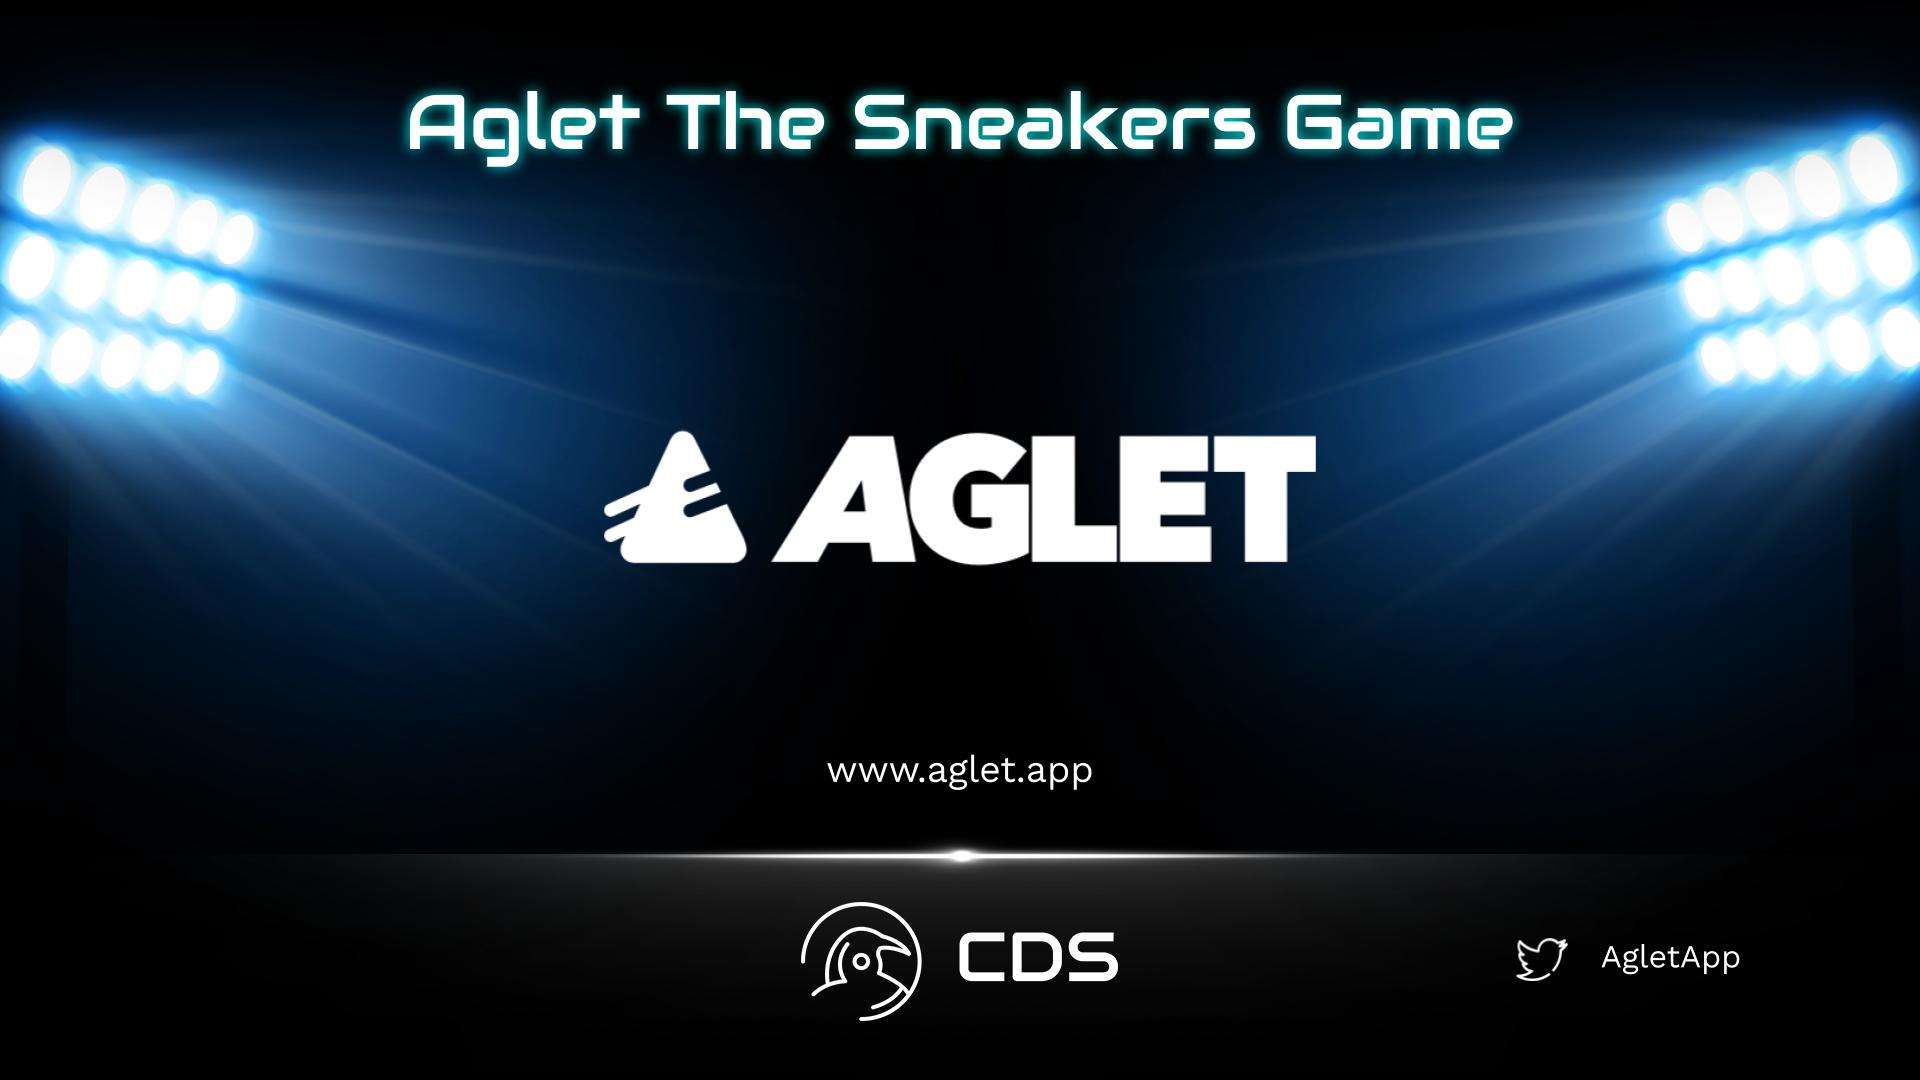 Aglet The Sneakers Game